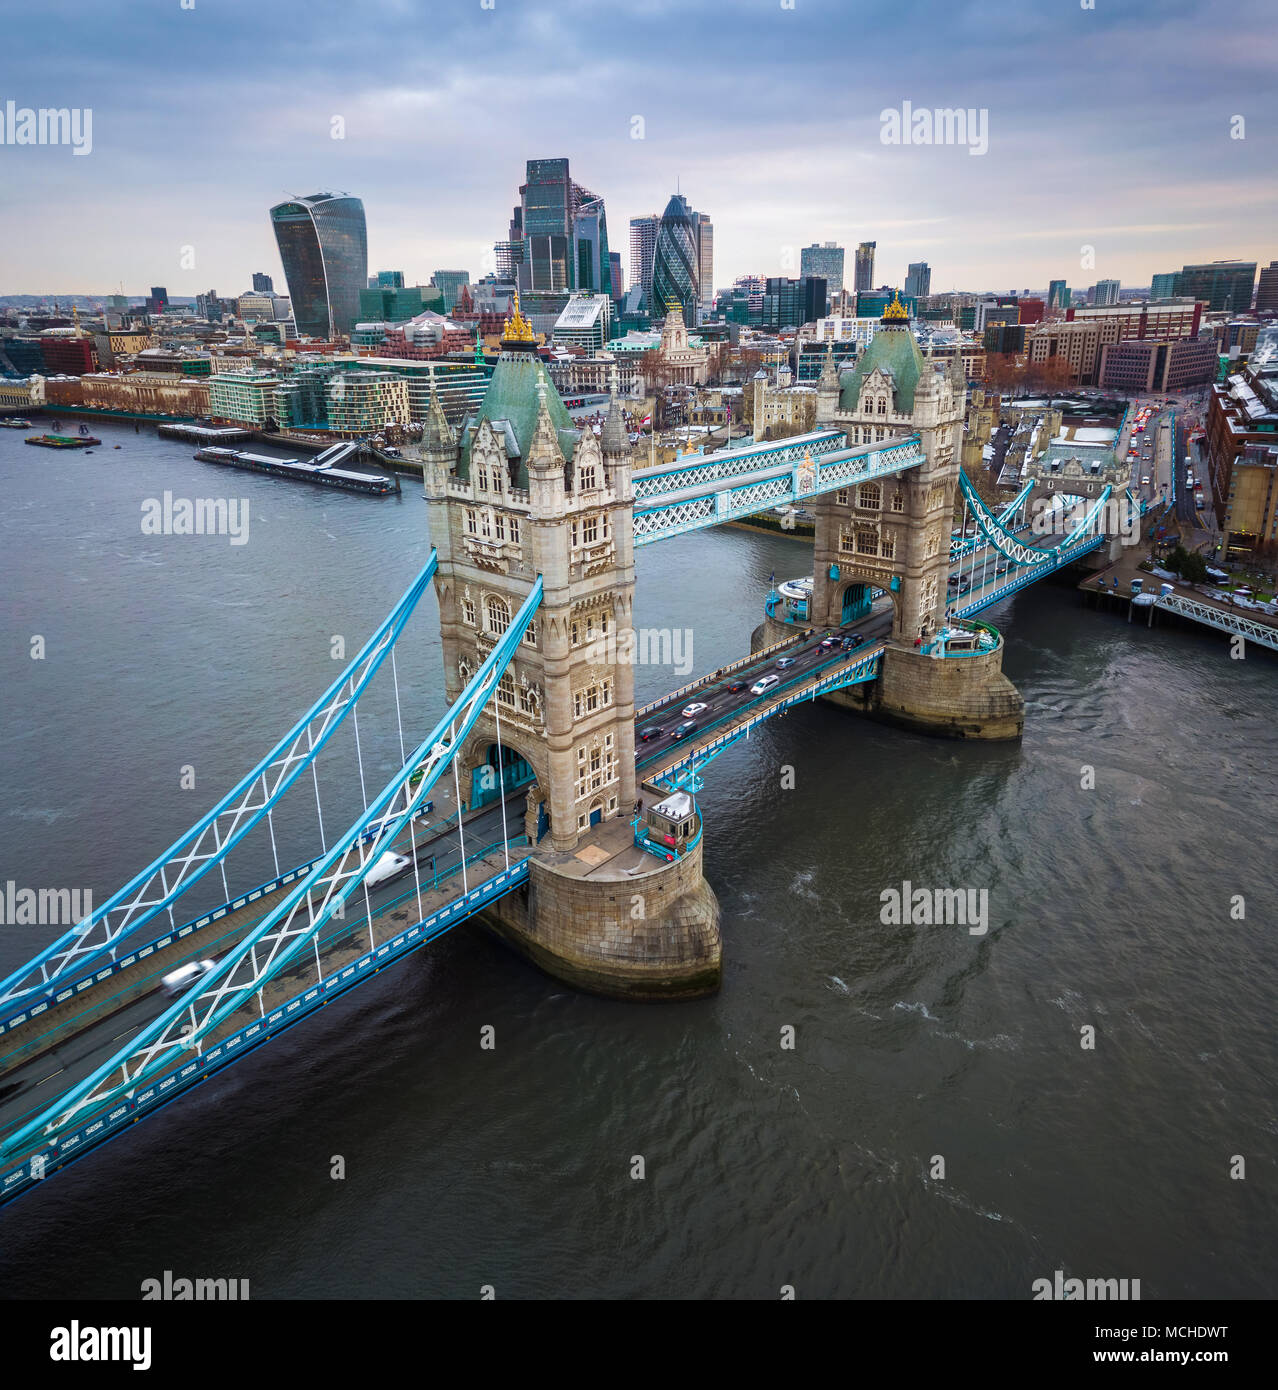 London, England - Aerial panormaic view of the iconic Tower Bridge and Tower of London on a cloudy moring with skyscrapers of the financial Bank Distr Stock Photo